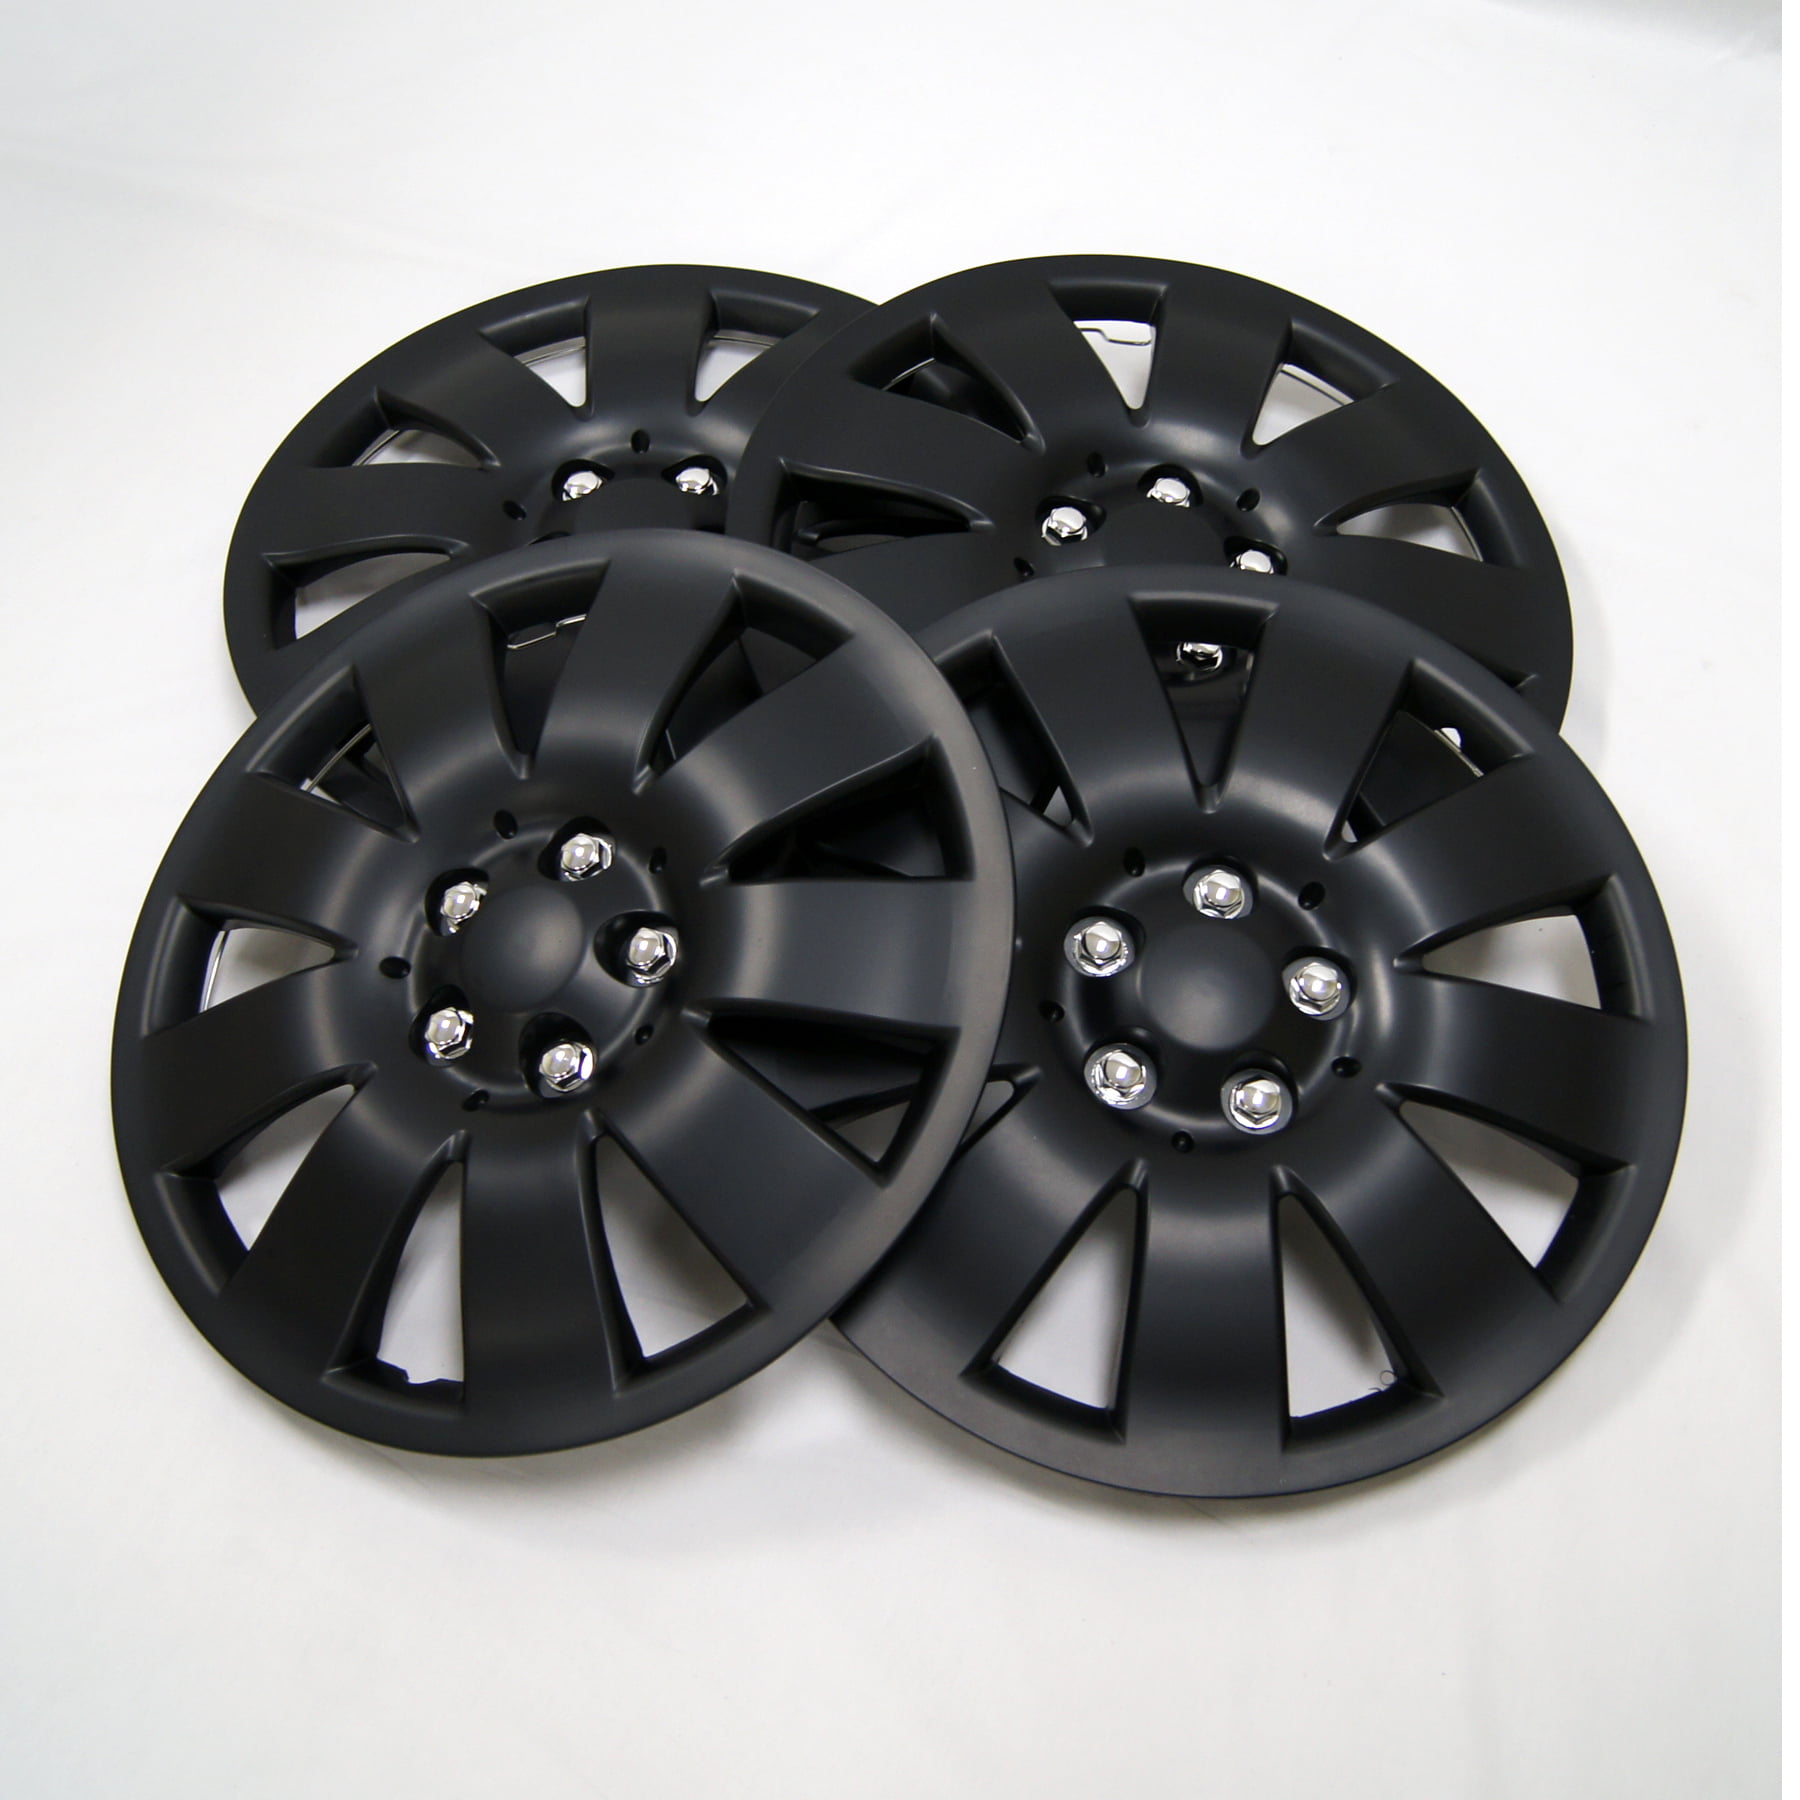 16" Inches Hubcap Style#721-1pc Qty 1 of 16 inch Wheel Rim Skin Cover Hub caps 